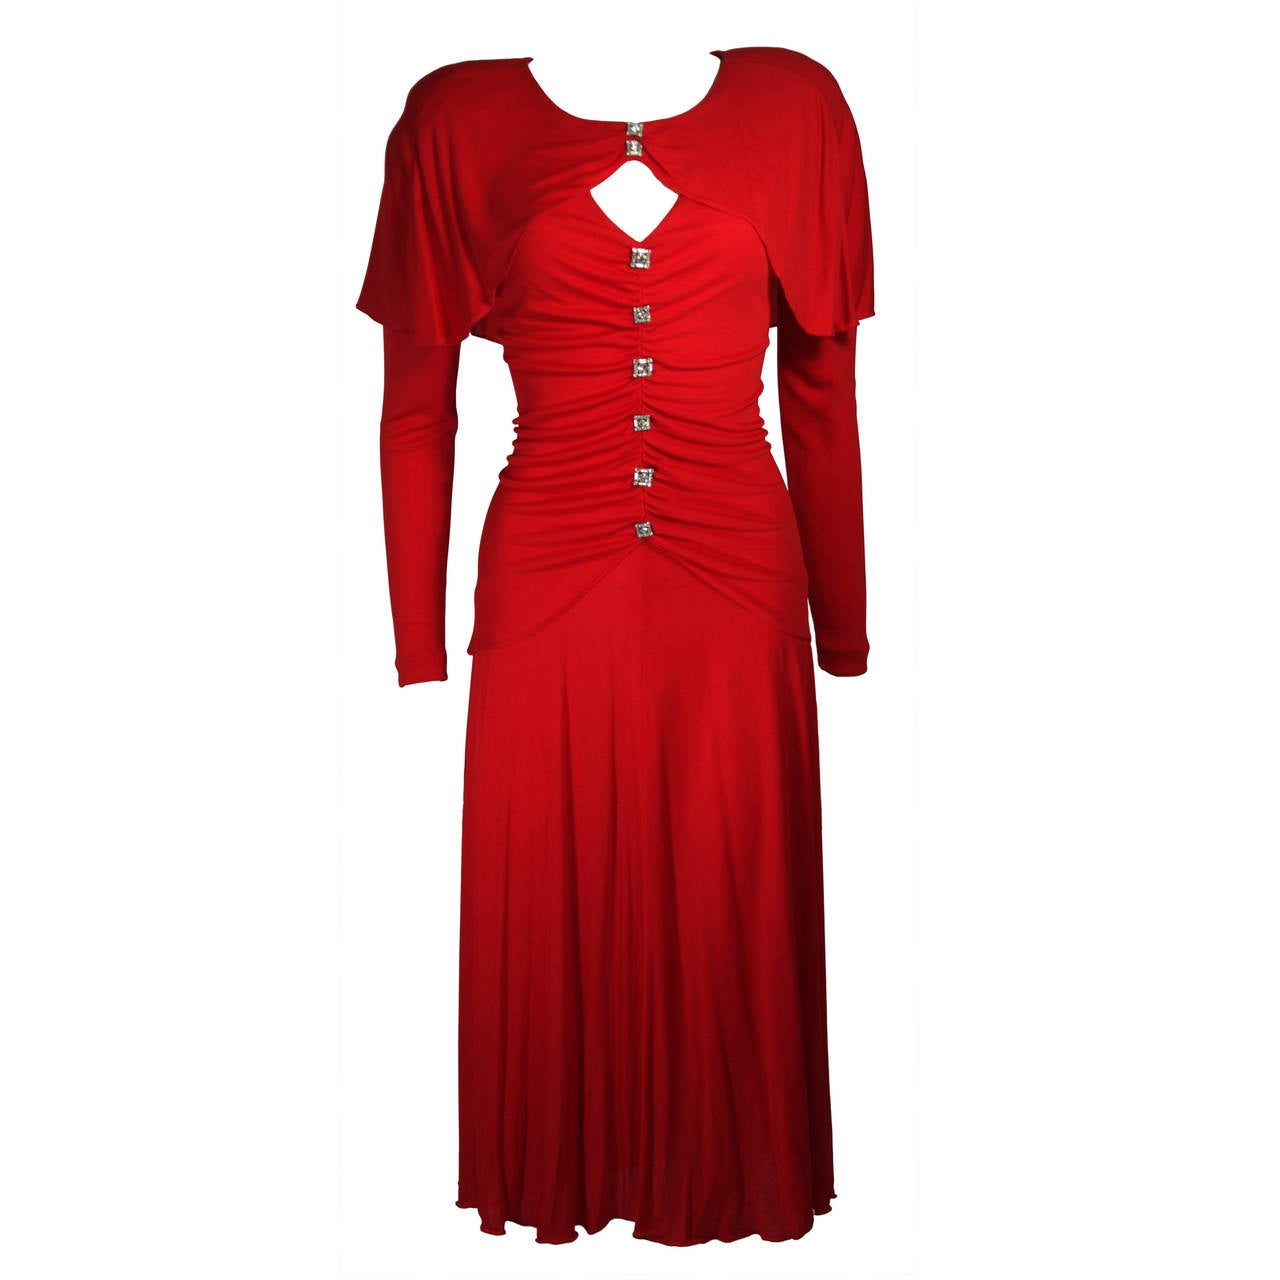 Holly Harp Red Jersey Long Sleeve Dress with Rhinestone Buttons Size Medium